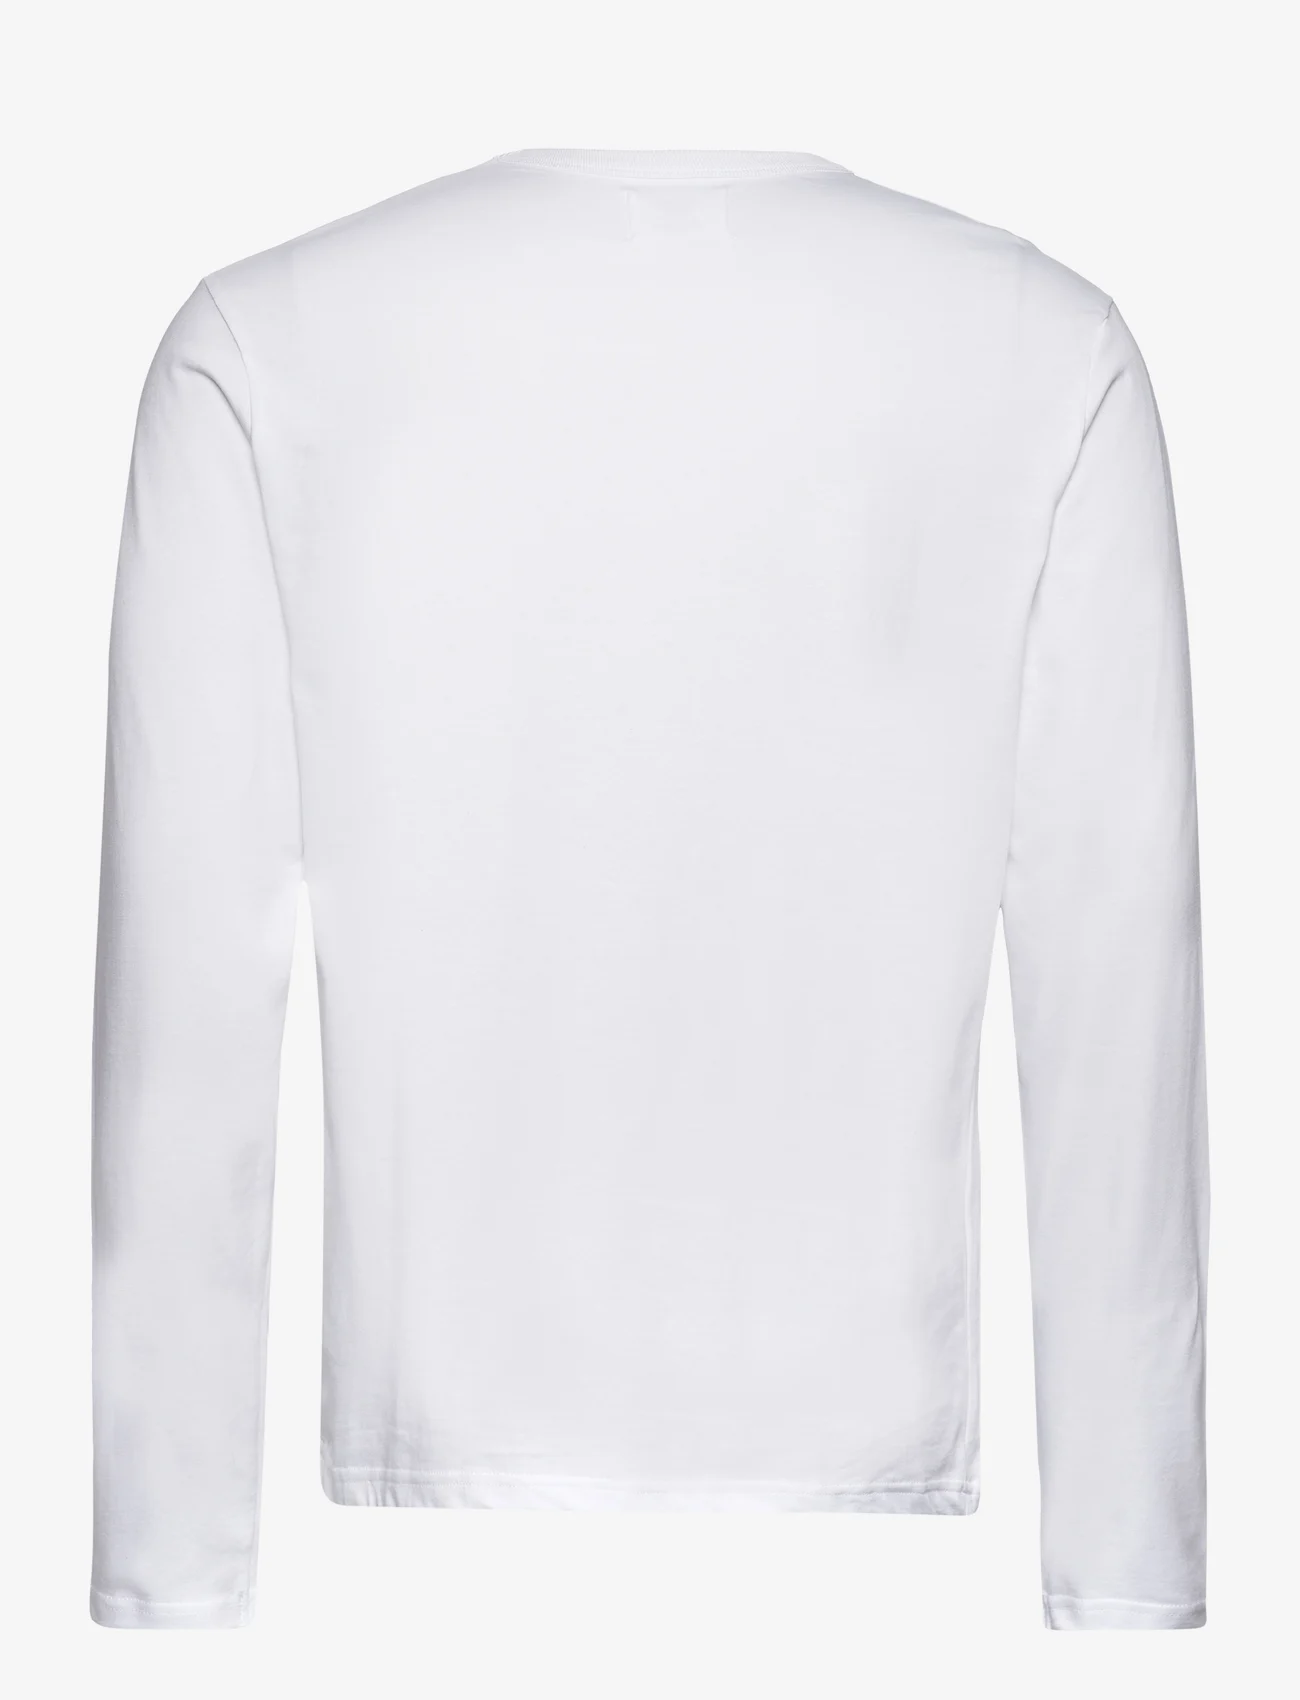 Double A by Wood Wood - Mel longsleeve - t-shirts & tops - white - 1